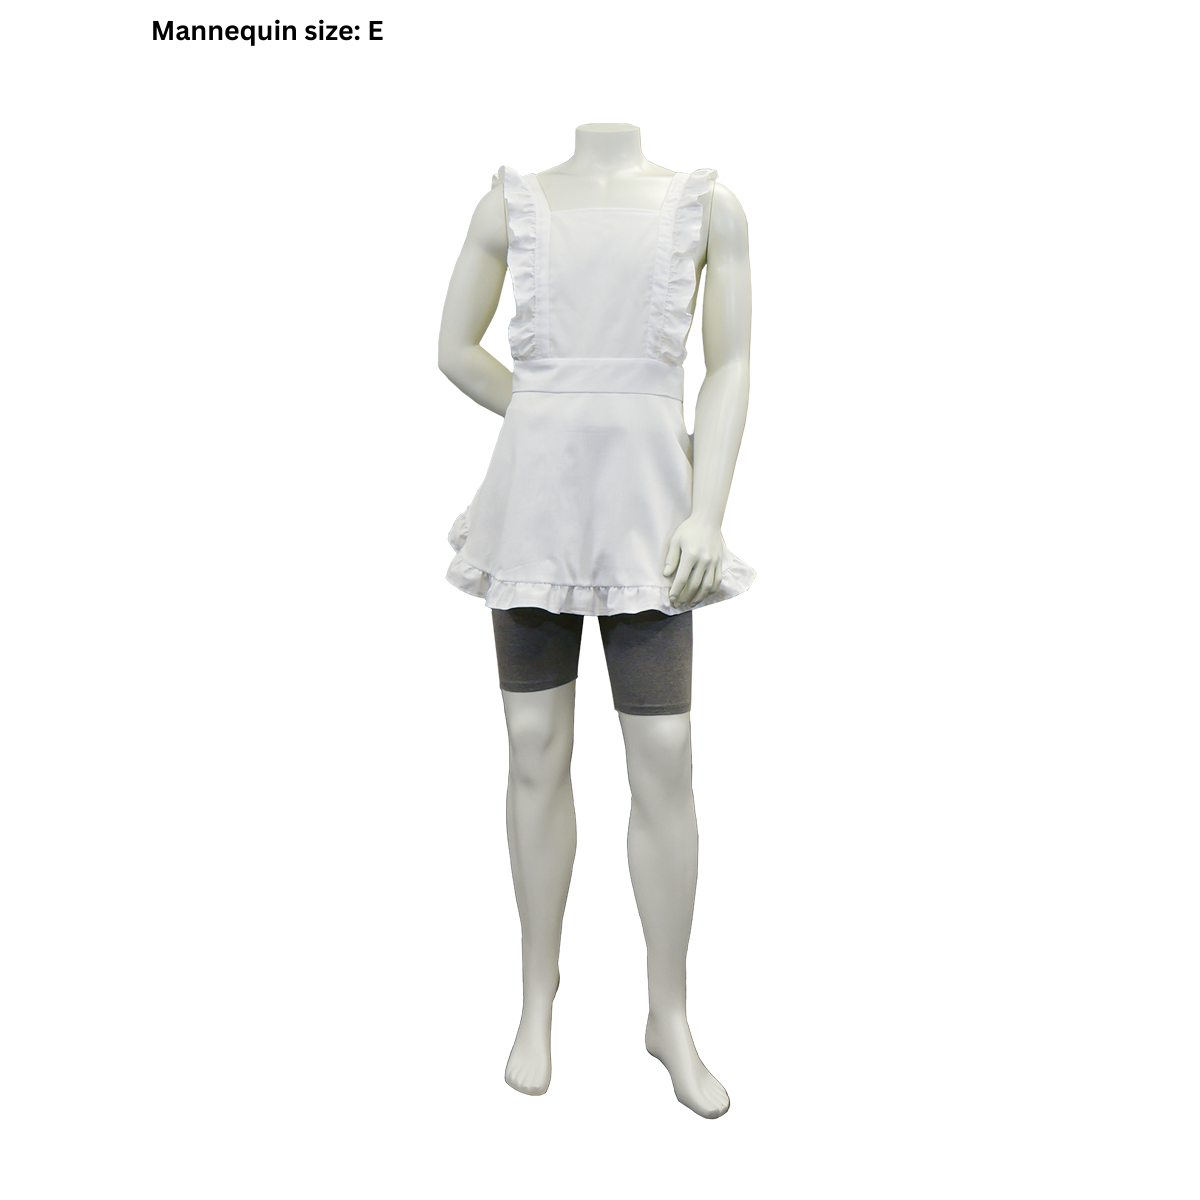 A completed FSCO Apron (m) on a male mannequin in size E. The apron is white with white ruffles. The A-line silhouette of the apron is visible.